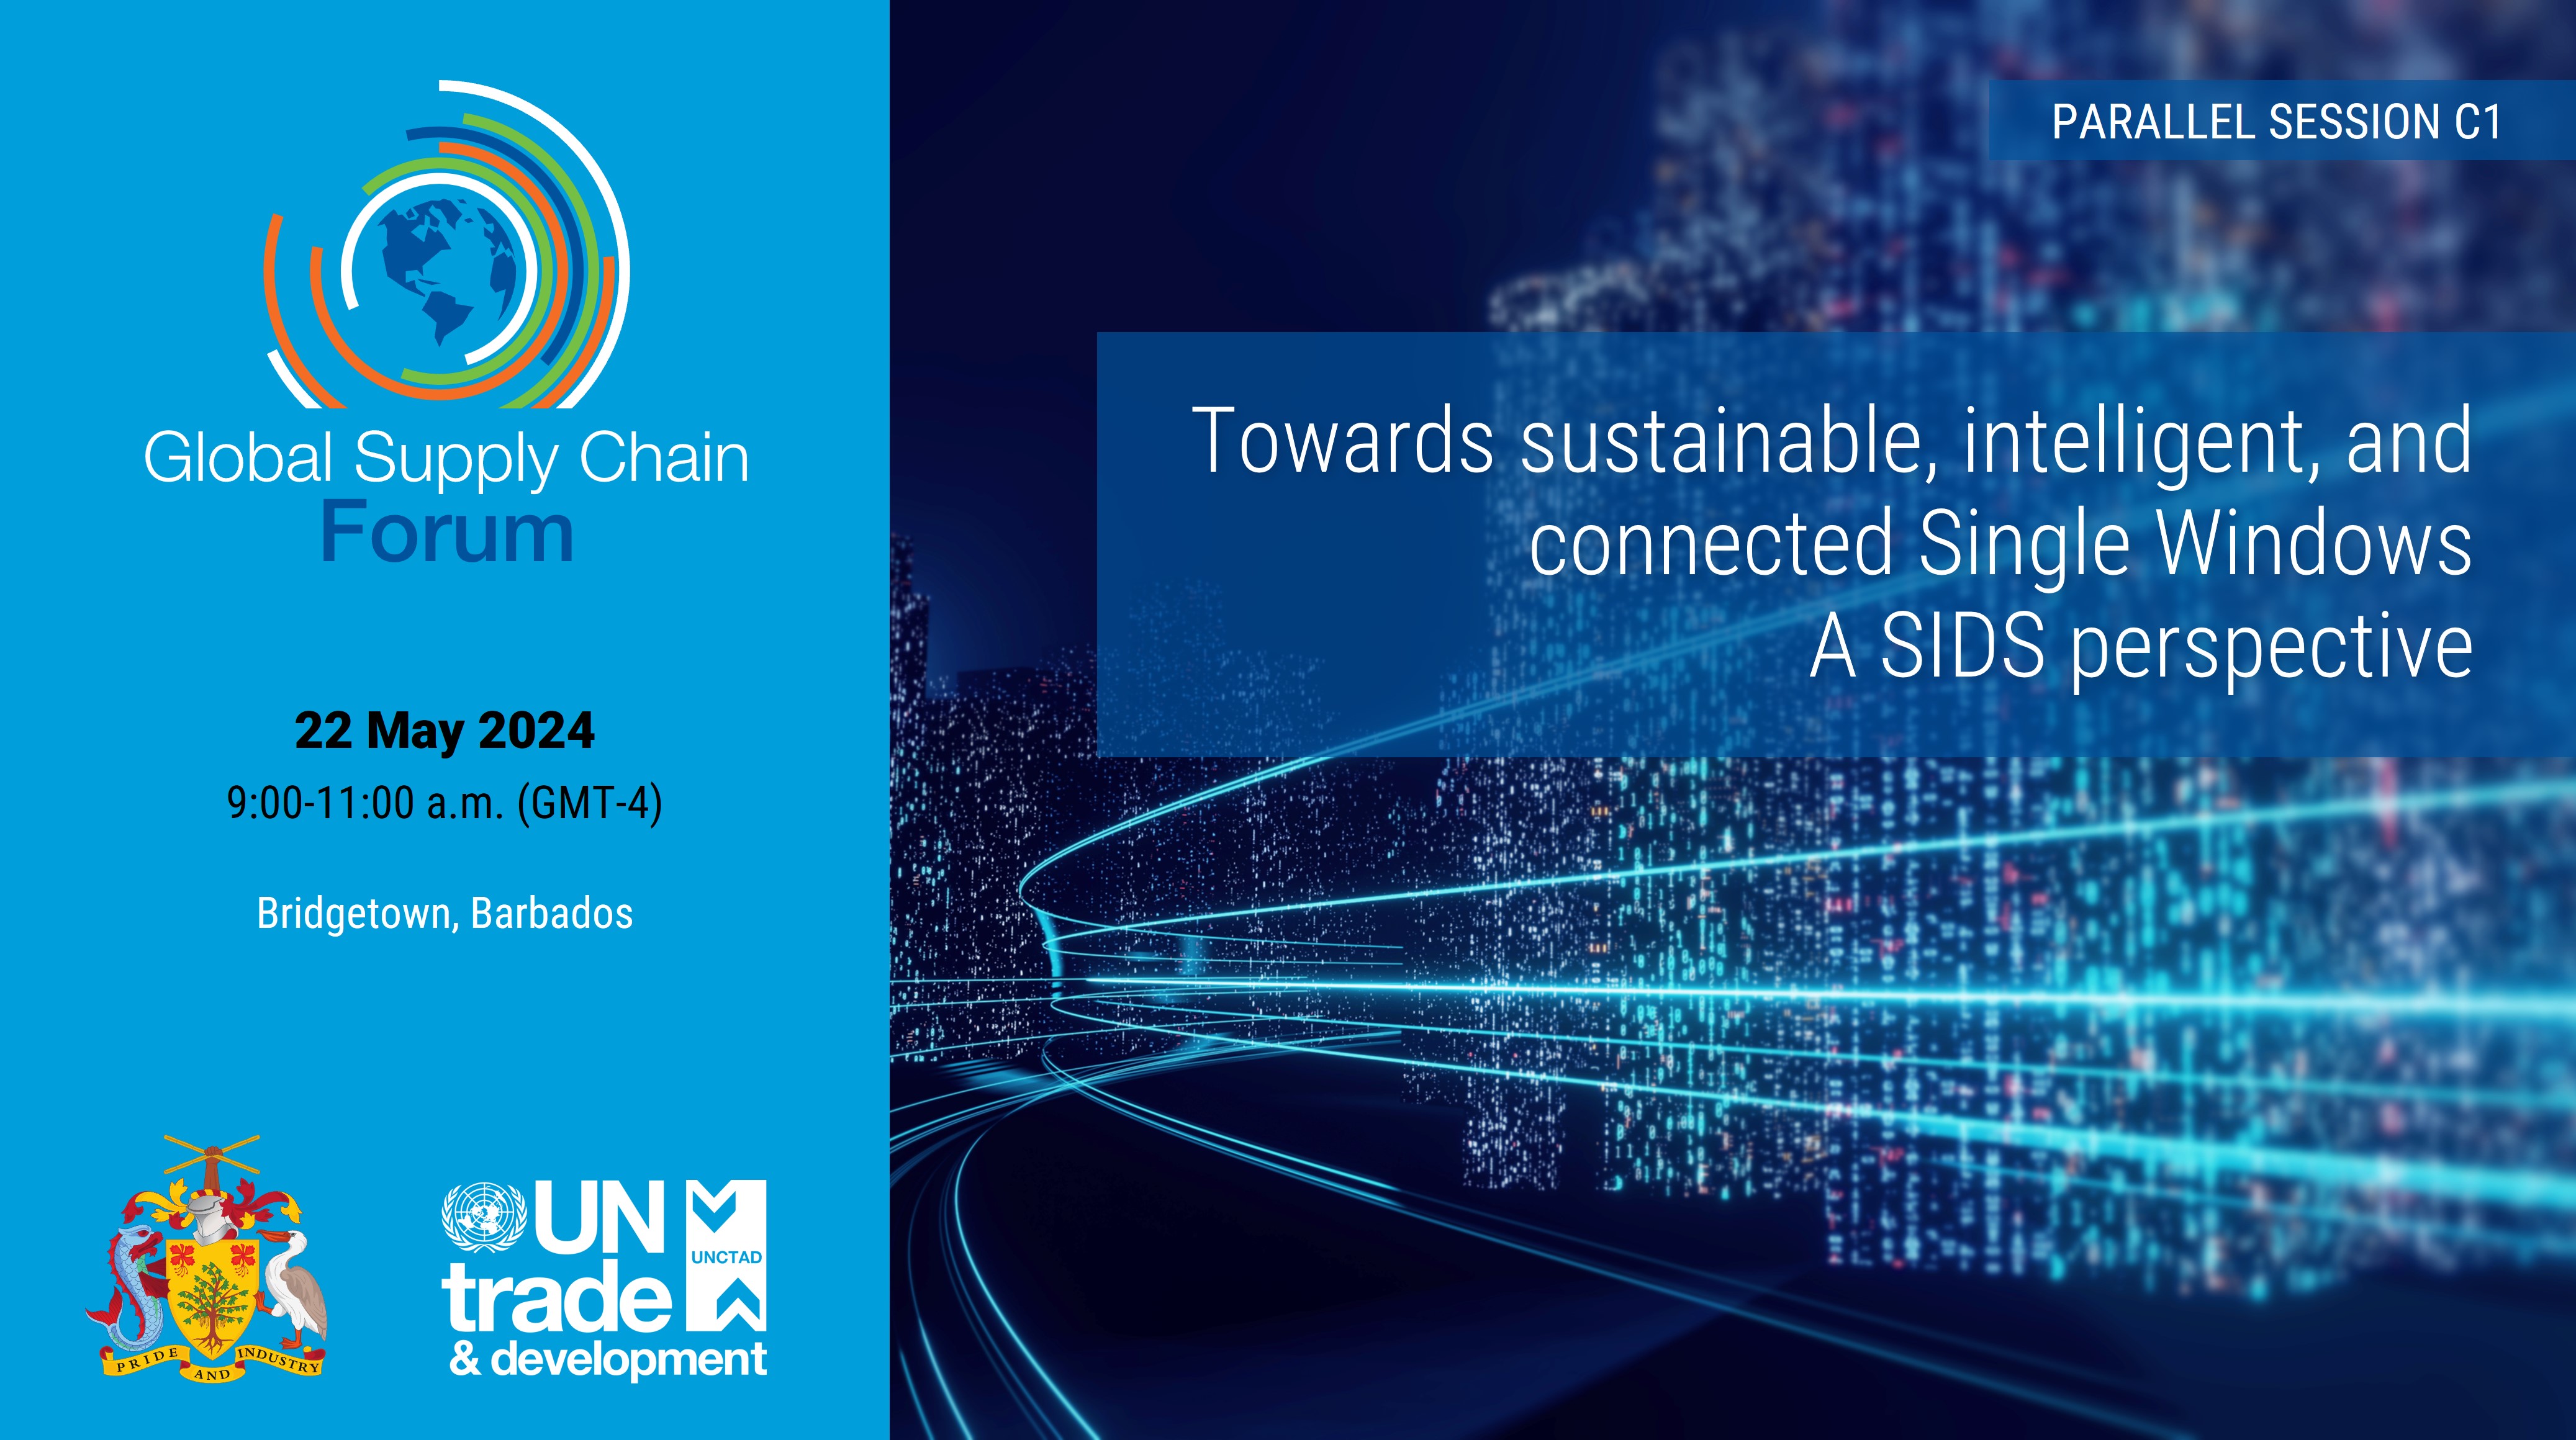 Towards adaptable Single Windows for International Trade - A SIDS perspective